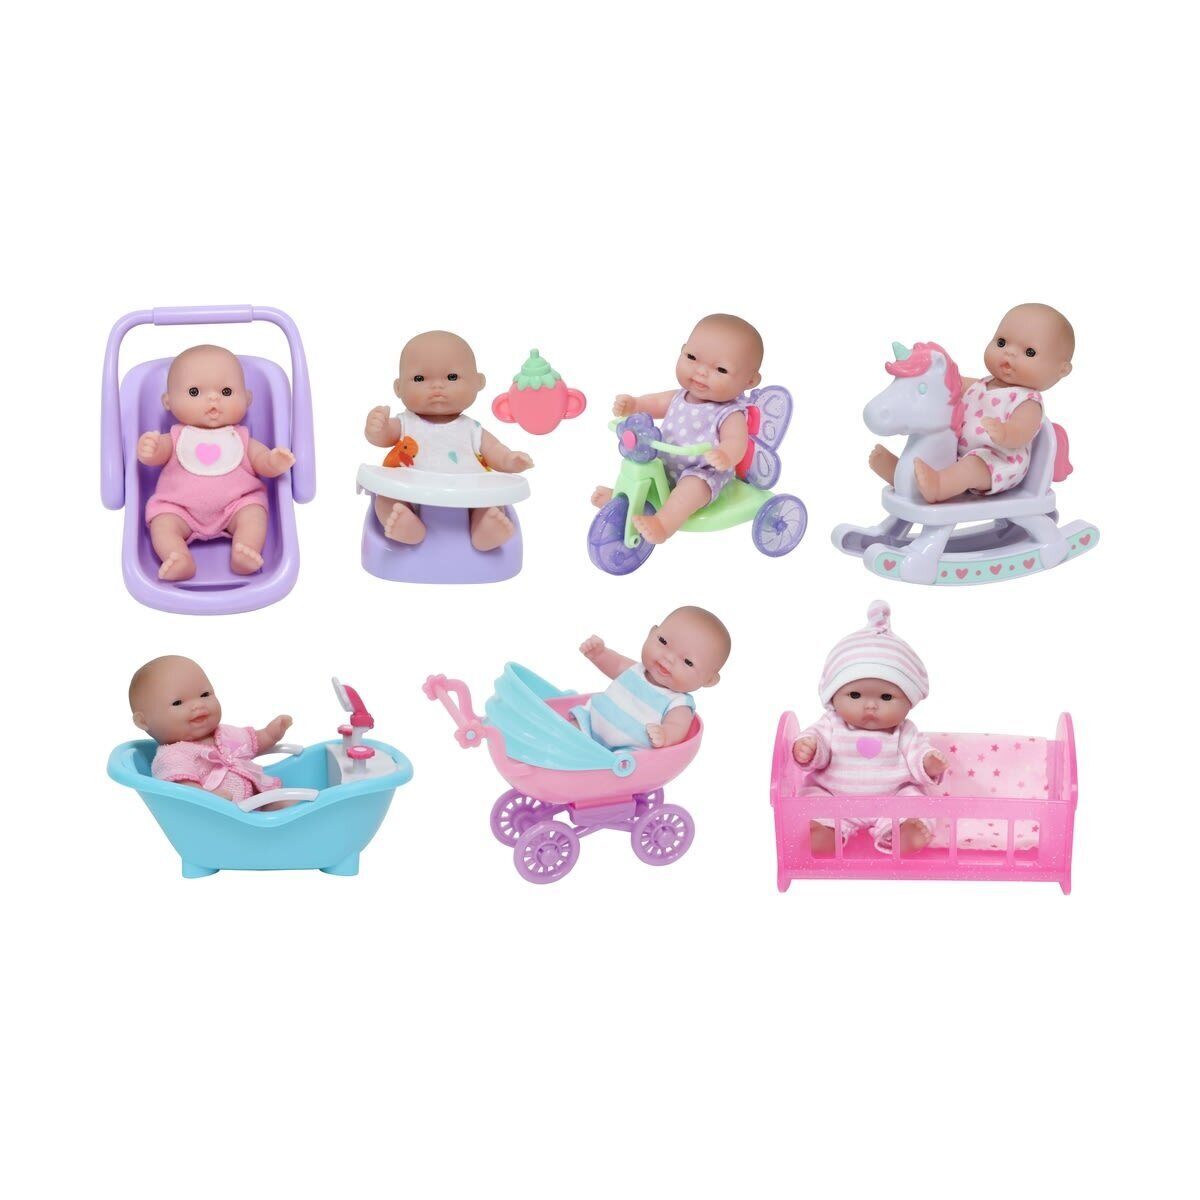 JC Toys Cuddle Baby Doll Assorted, 5 inches, 16750 1pc